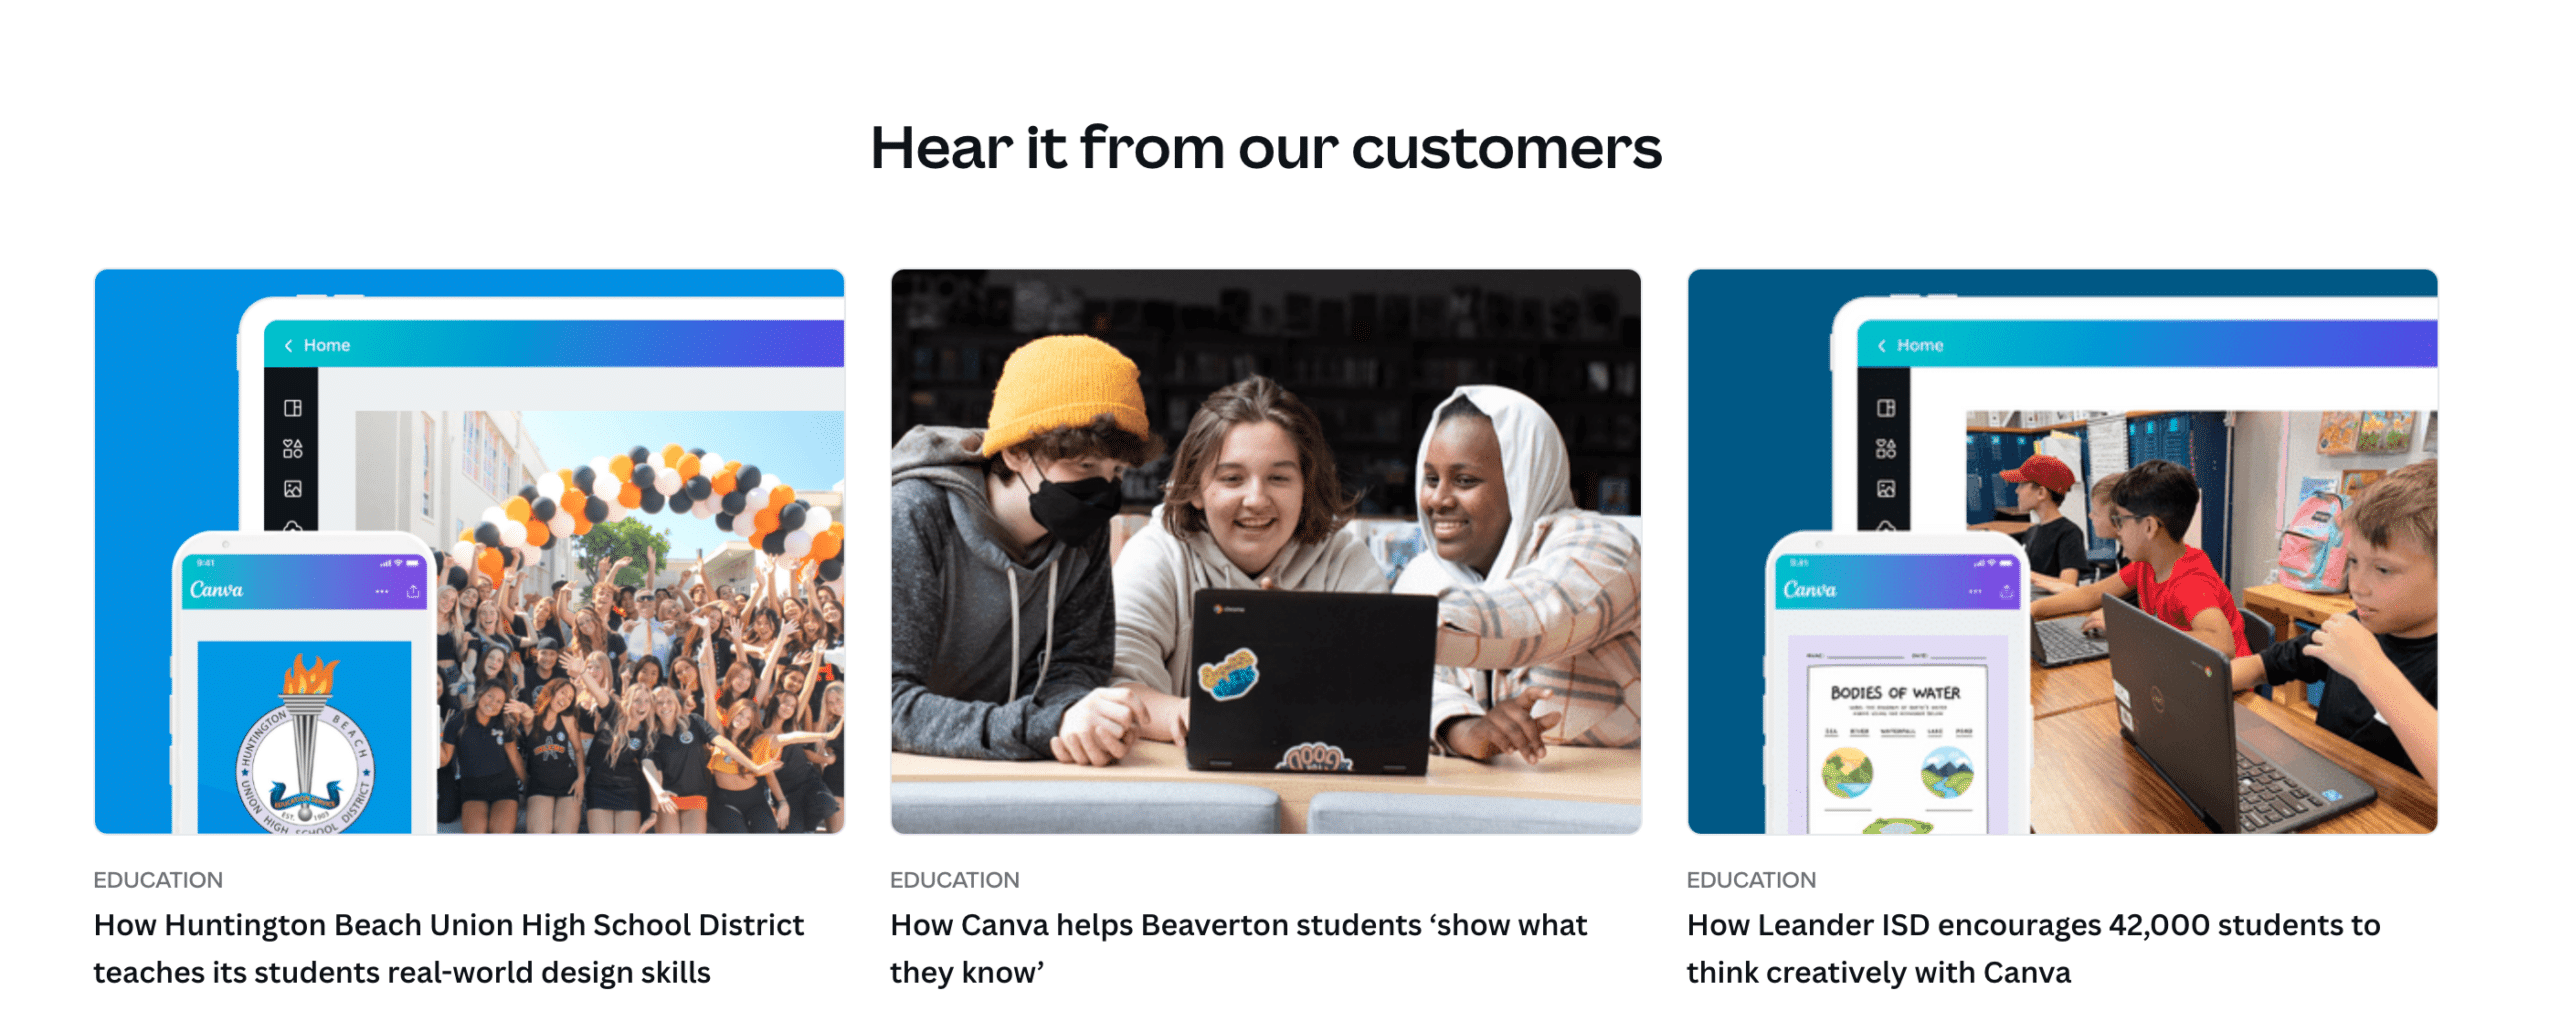 Canva SaaS social proof example